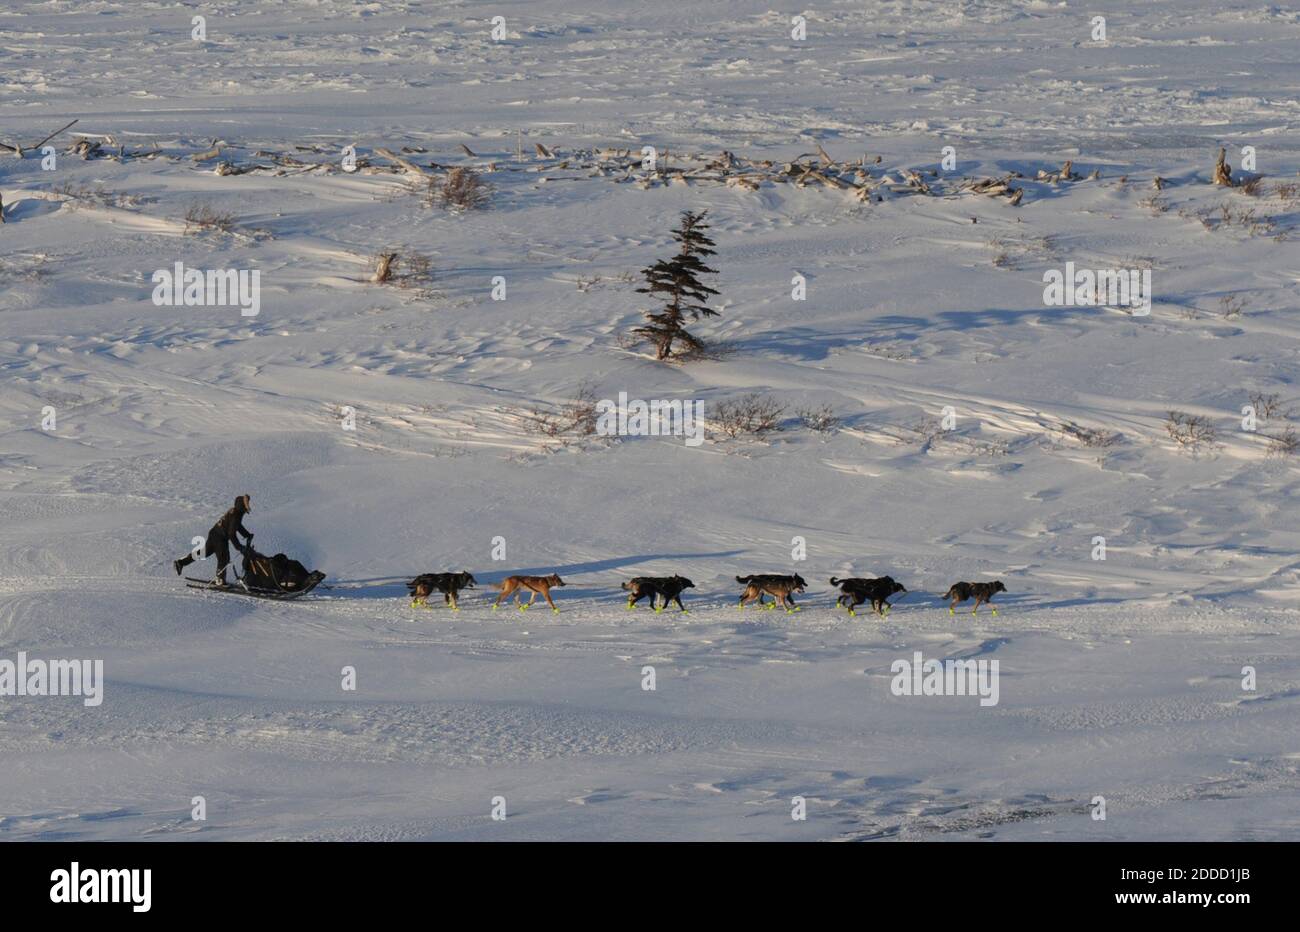 NO FILM, NO VIDEO, NO TV, NO DOCUMENTARY - A musher drives his team towards Koyuk, Alaska, USA on March 11, 2013, during the Iditarod Trail Sled Dog Race. Photo by Bill Roth/Anchorage Daily News/MCT/ABACAPRESS.COM Stock Photo